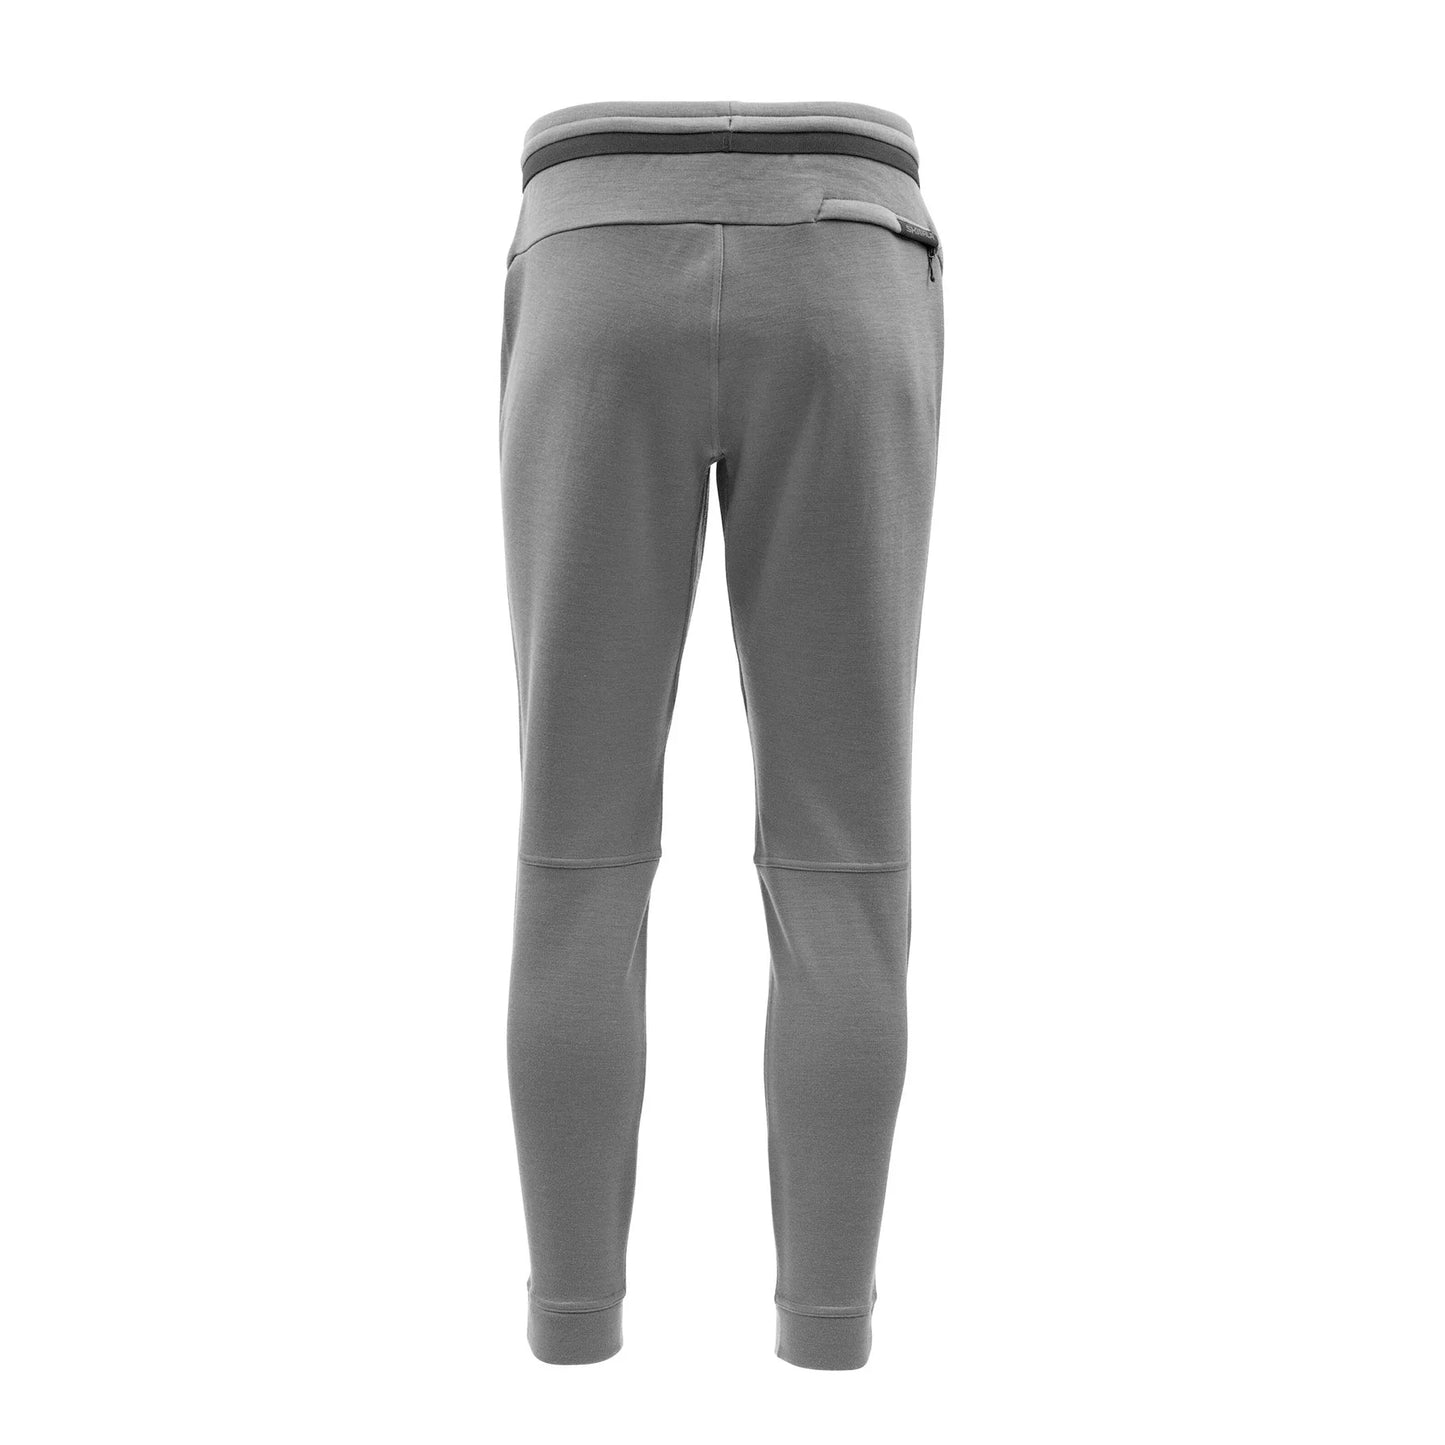 Skwala Thermo 350 Pant – charliesflybox